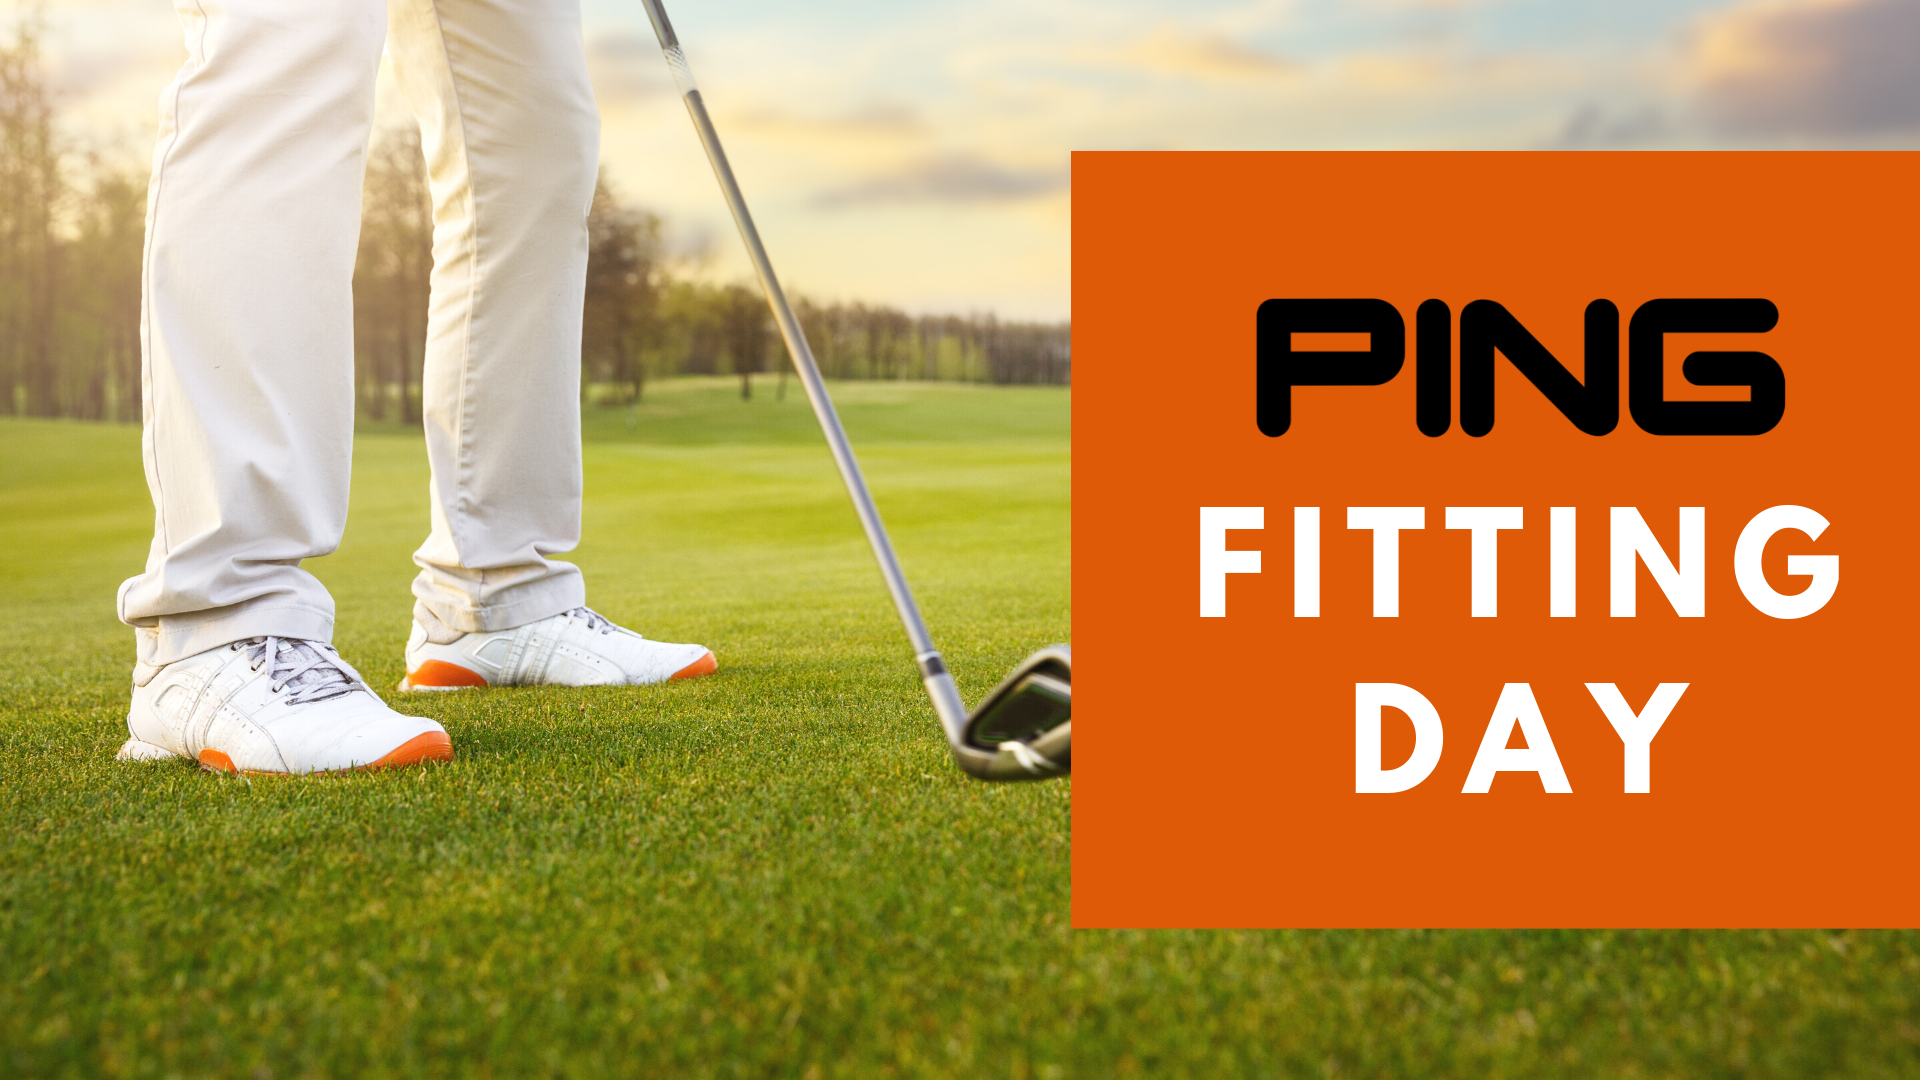 Find your perfect fit with our PING fitting day!